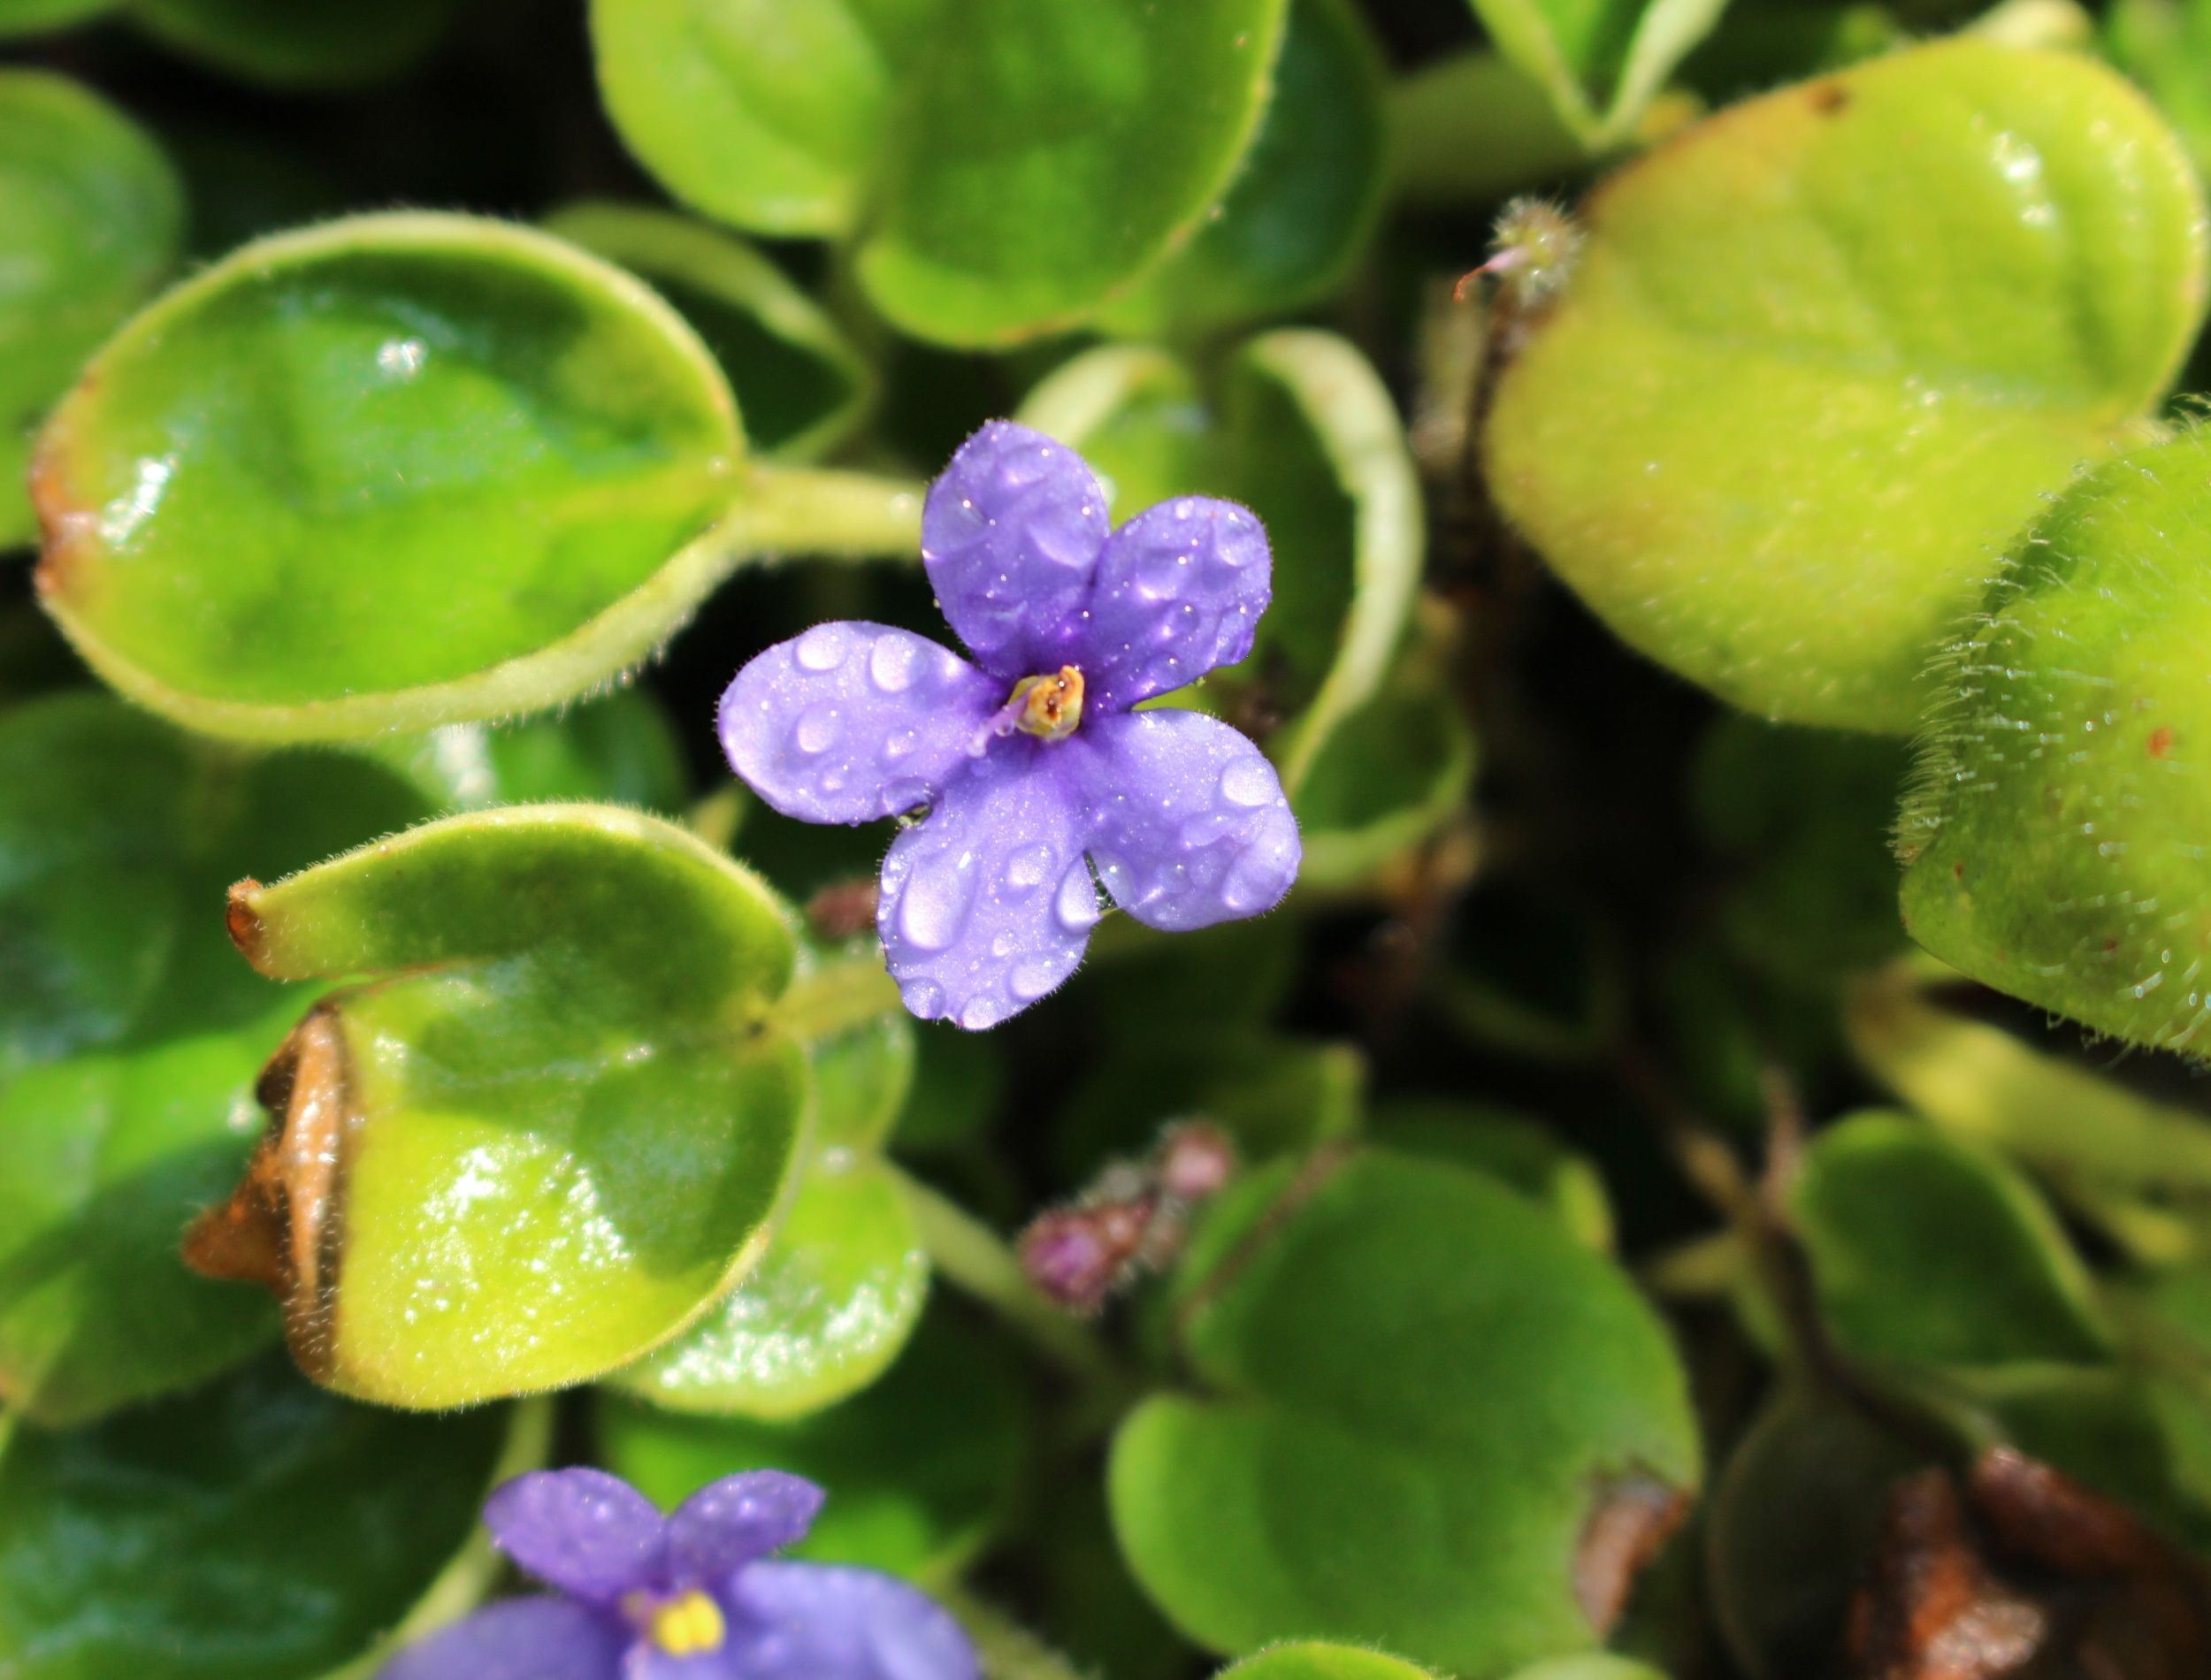 &quot;African Violet&quot; flower with raindrops in St. Gallen, Switzerland. Its scientific name is Saintpaulia Ionantha, native to Tanzania and Kenya.